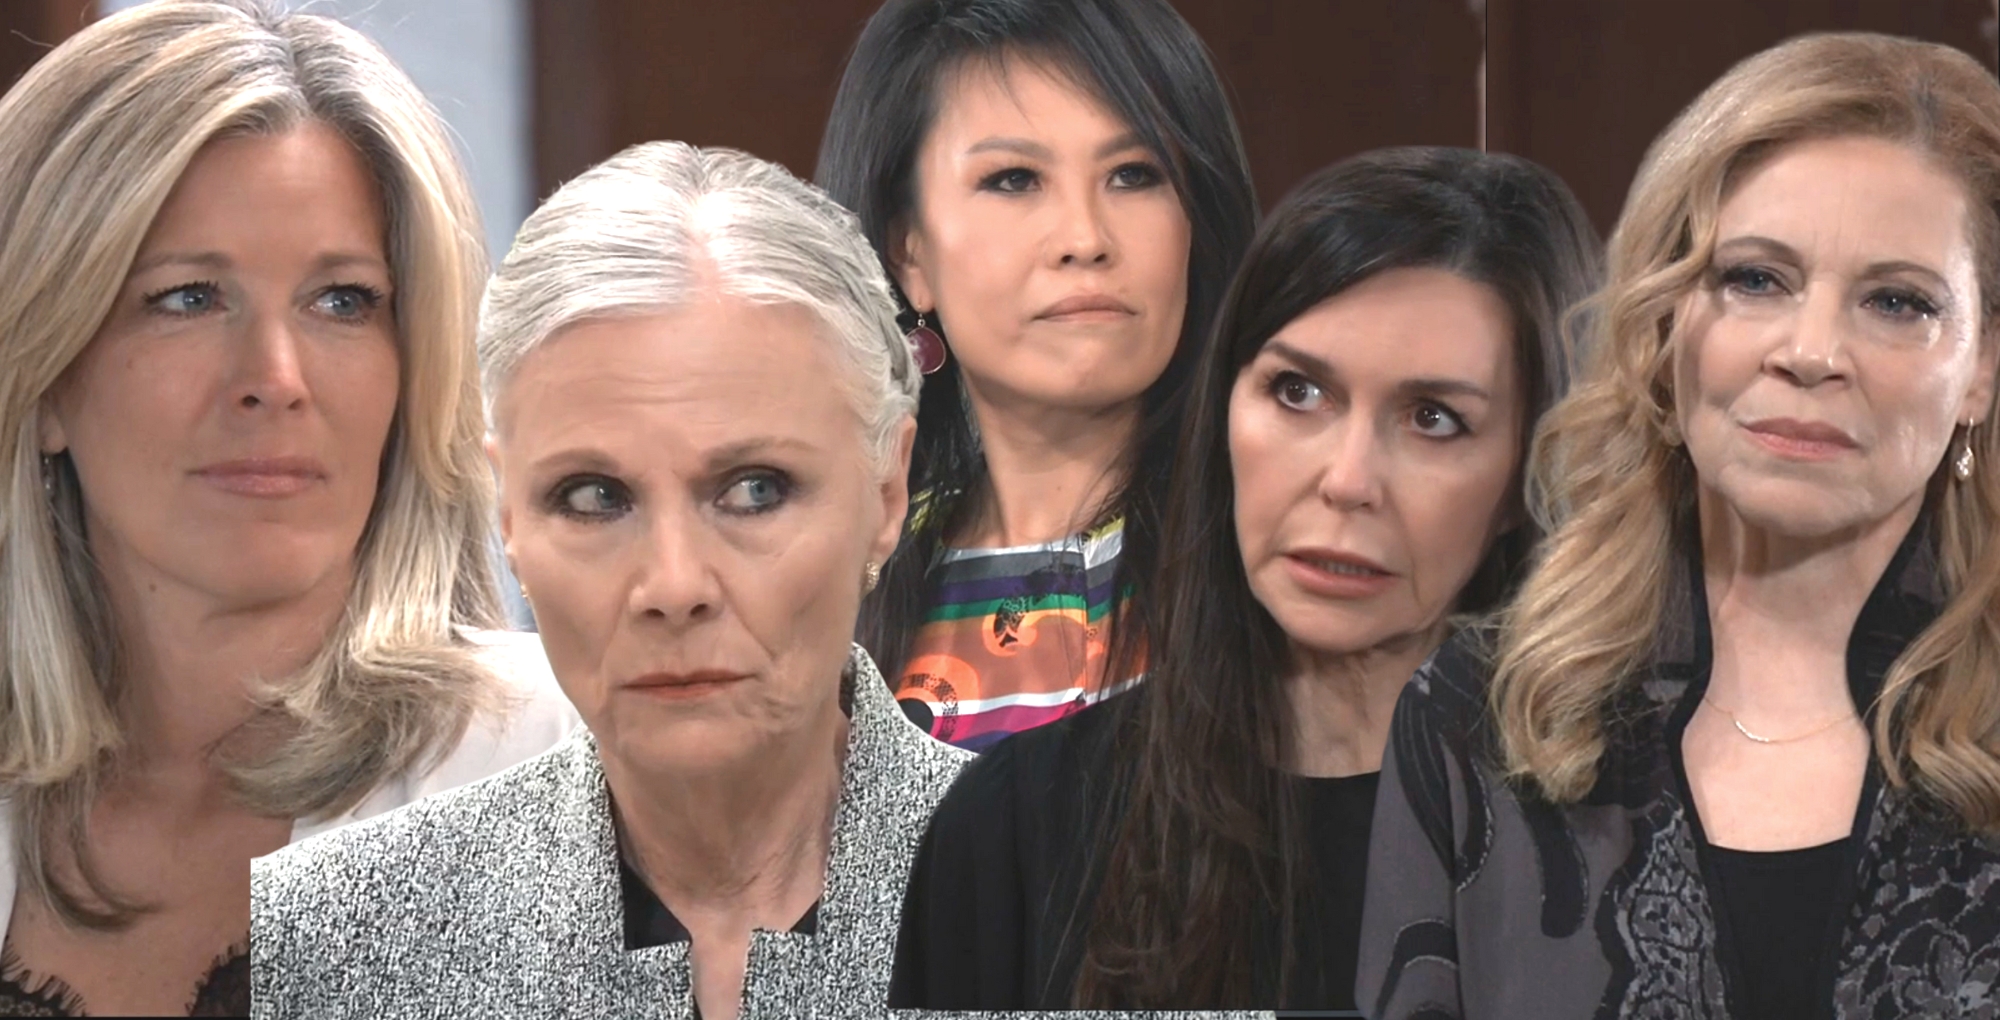 carly, tracy, anna, selina, and liesl are fearsome general hospital women.